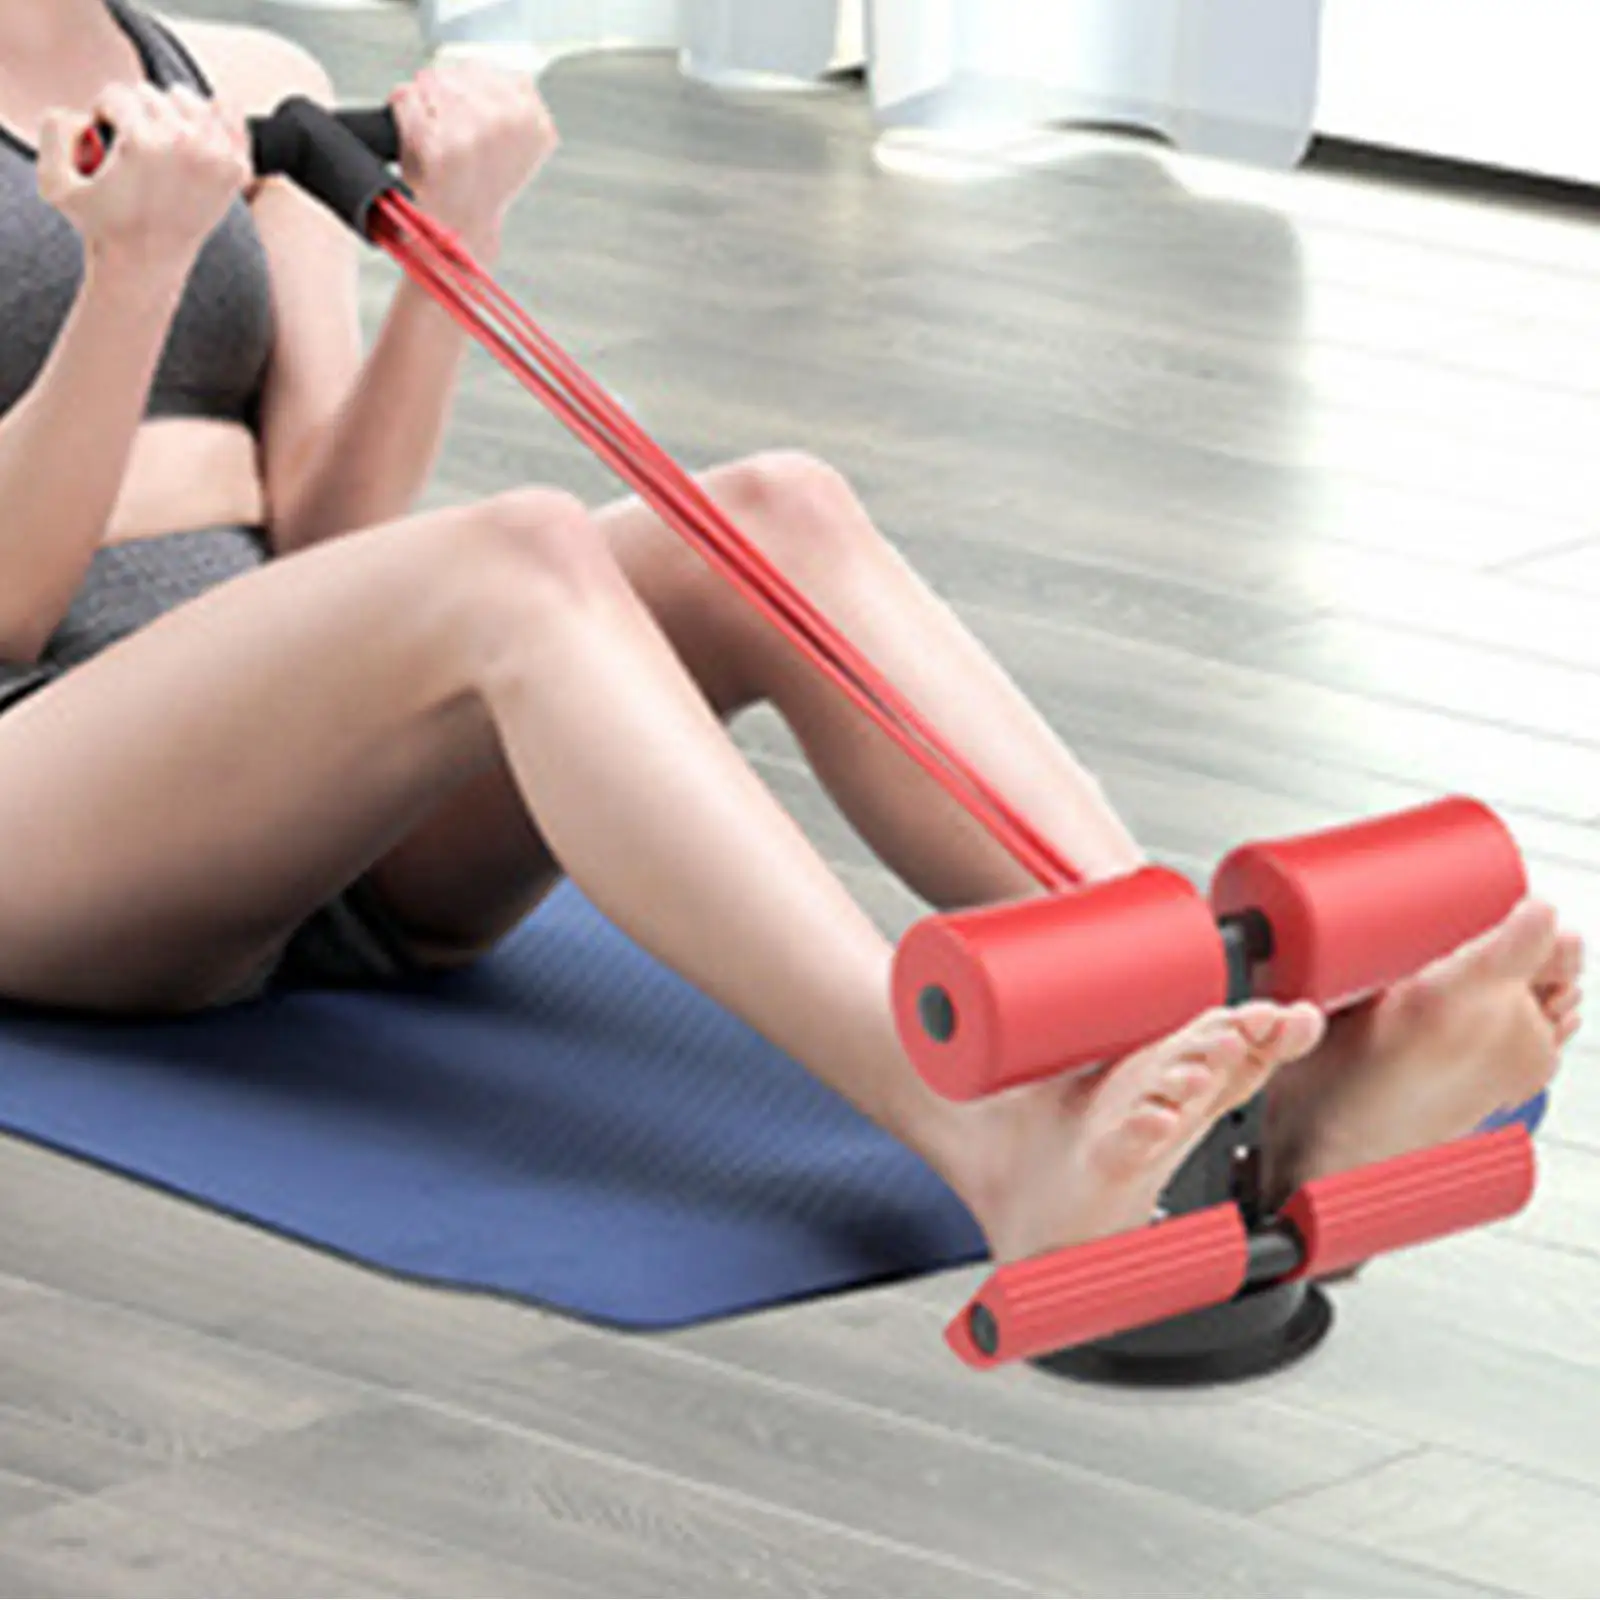 Ankle Support Fittings Aids Machine Sit up Rack for Fitness Workout Travel